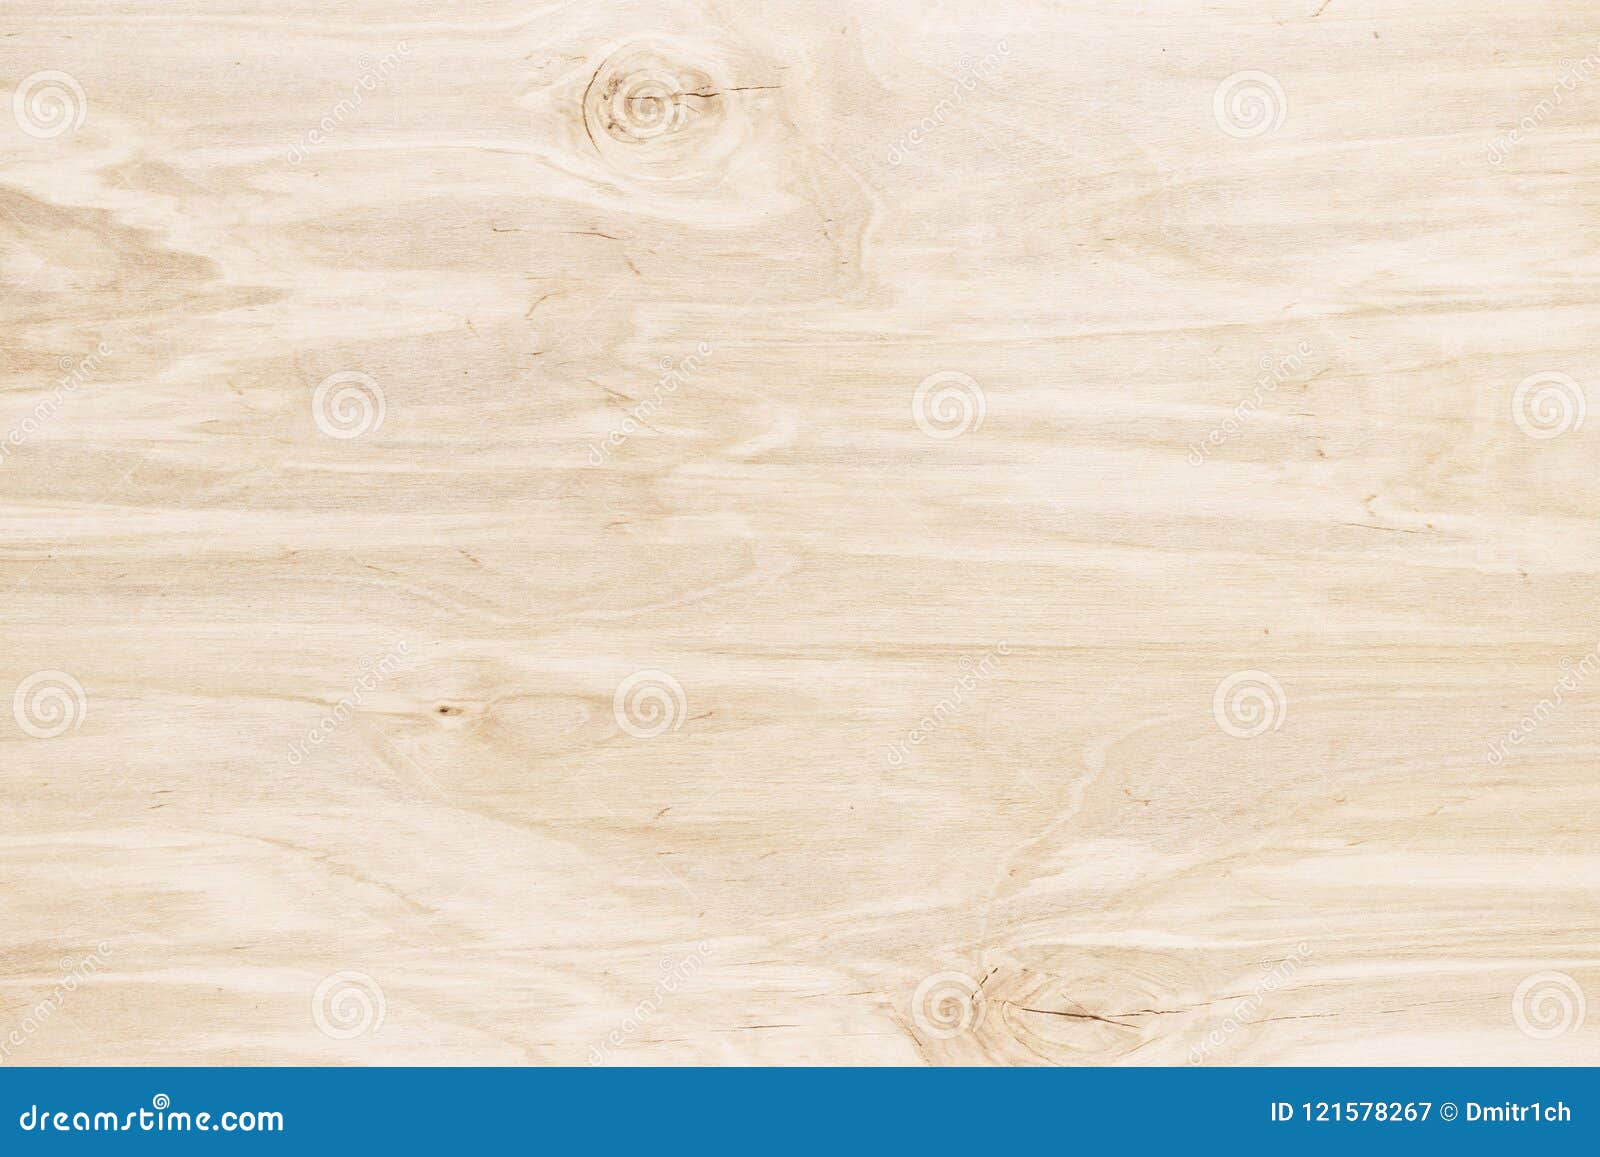 White Wood Texture Background, Wooden Table Top View Stock Photo, Picture  and Royalty Free Image. Image 75383483.